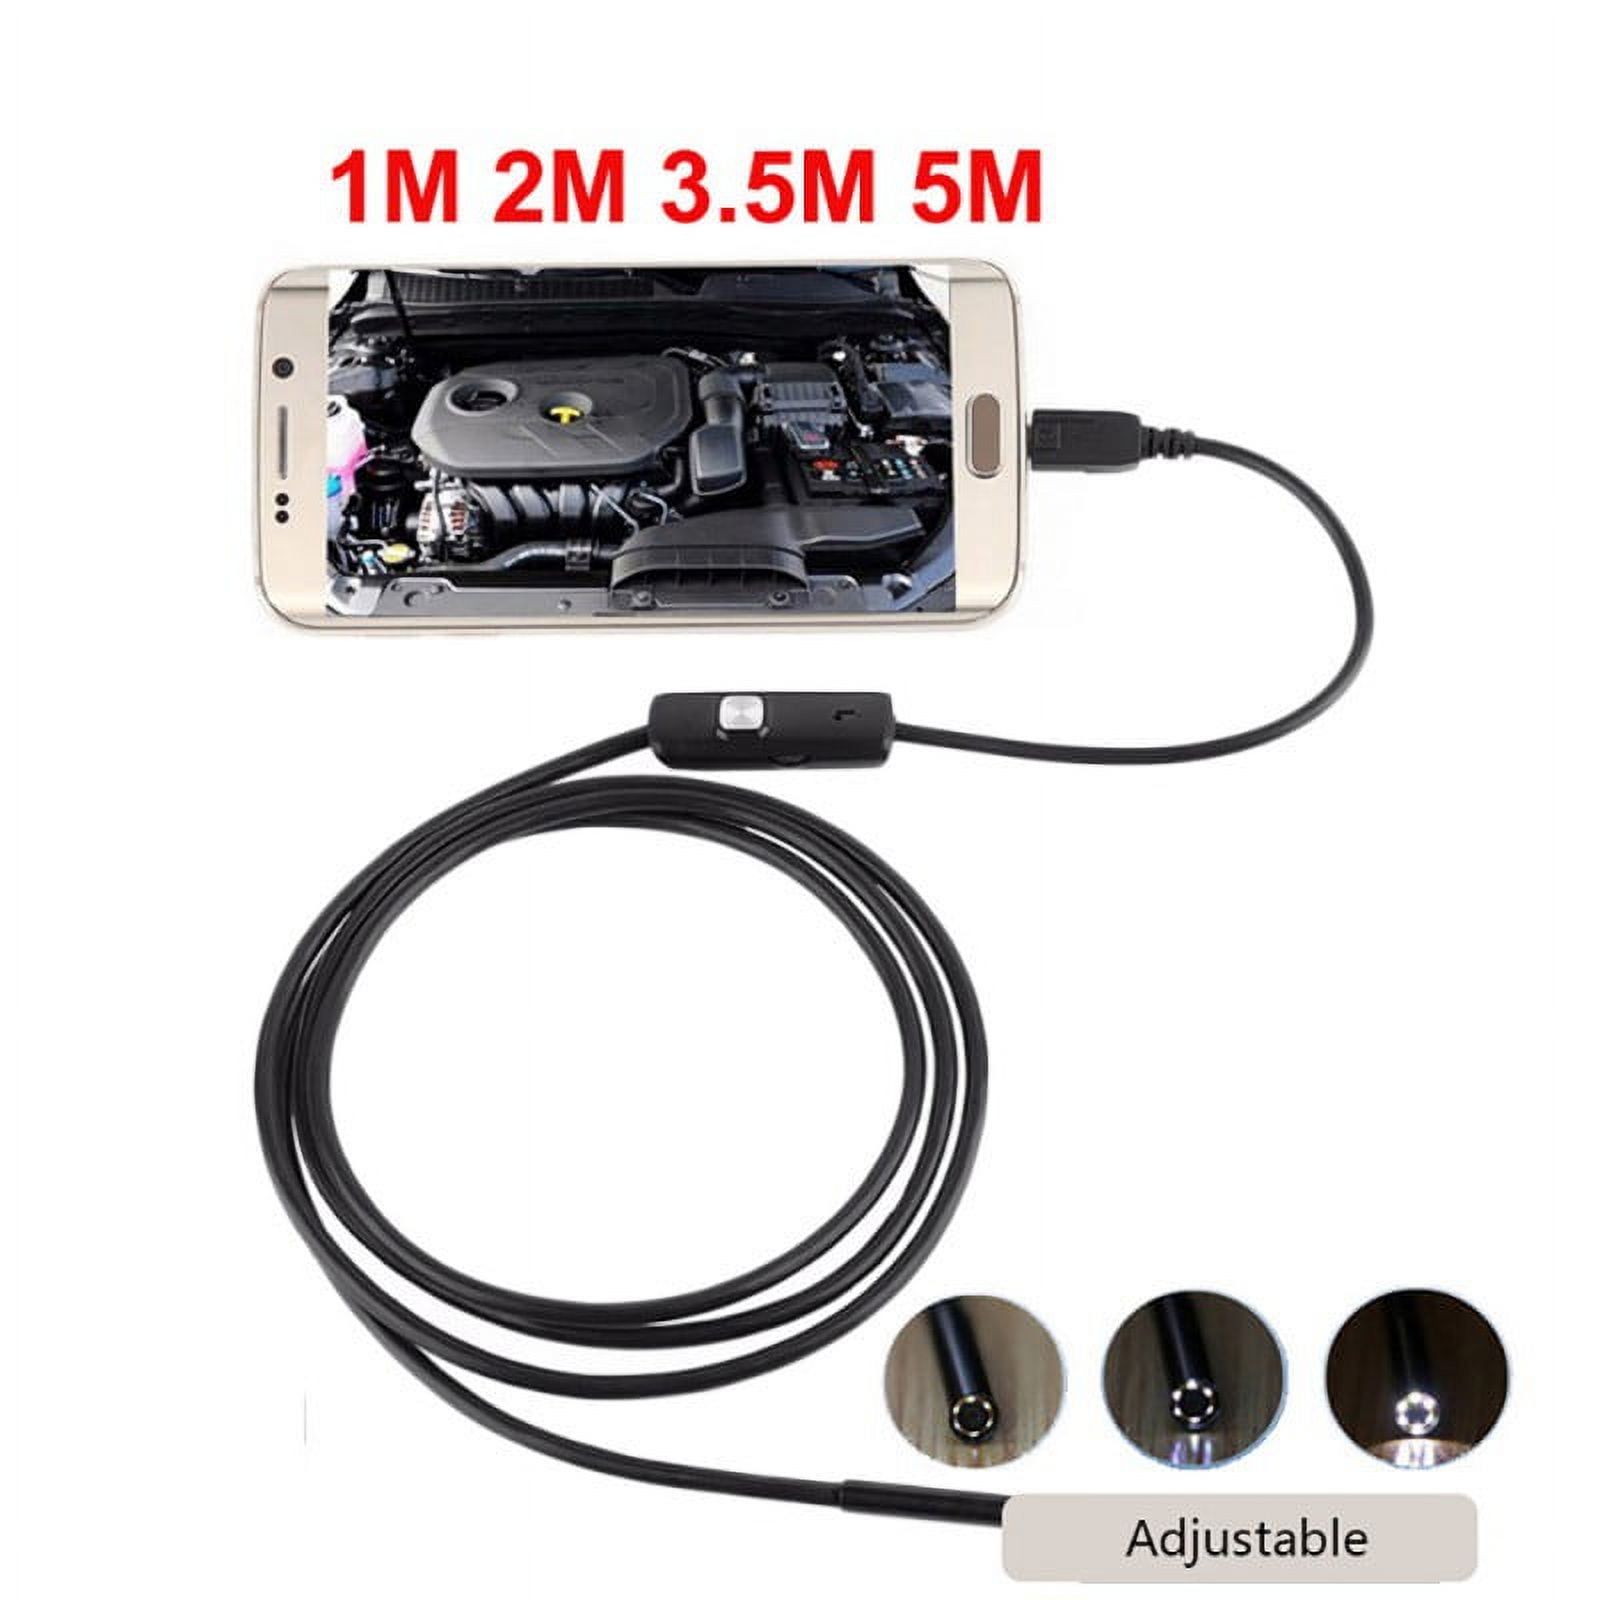 1m USB Inspection Camera Borescope Scope Camera with 5.5mm / 6 LED Lights  for Android Windows IP67 Waterproof Smart Phone Endoscope Wholesale